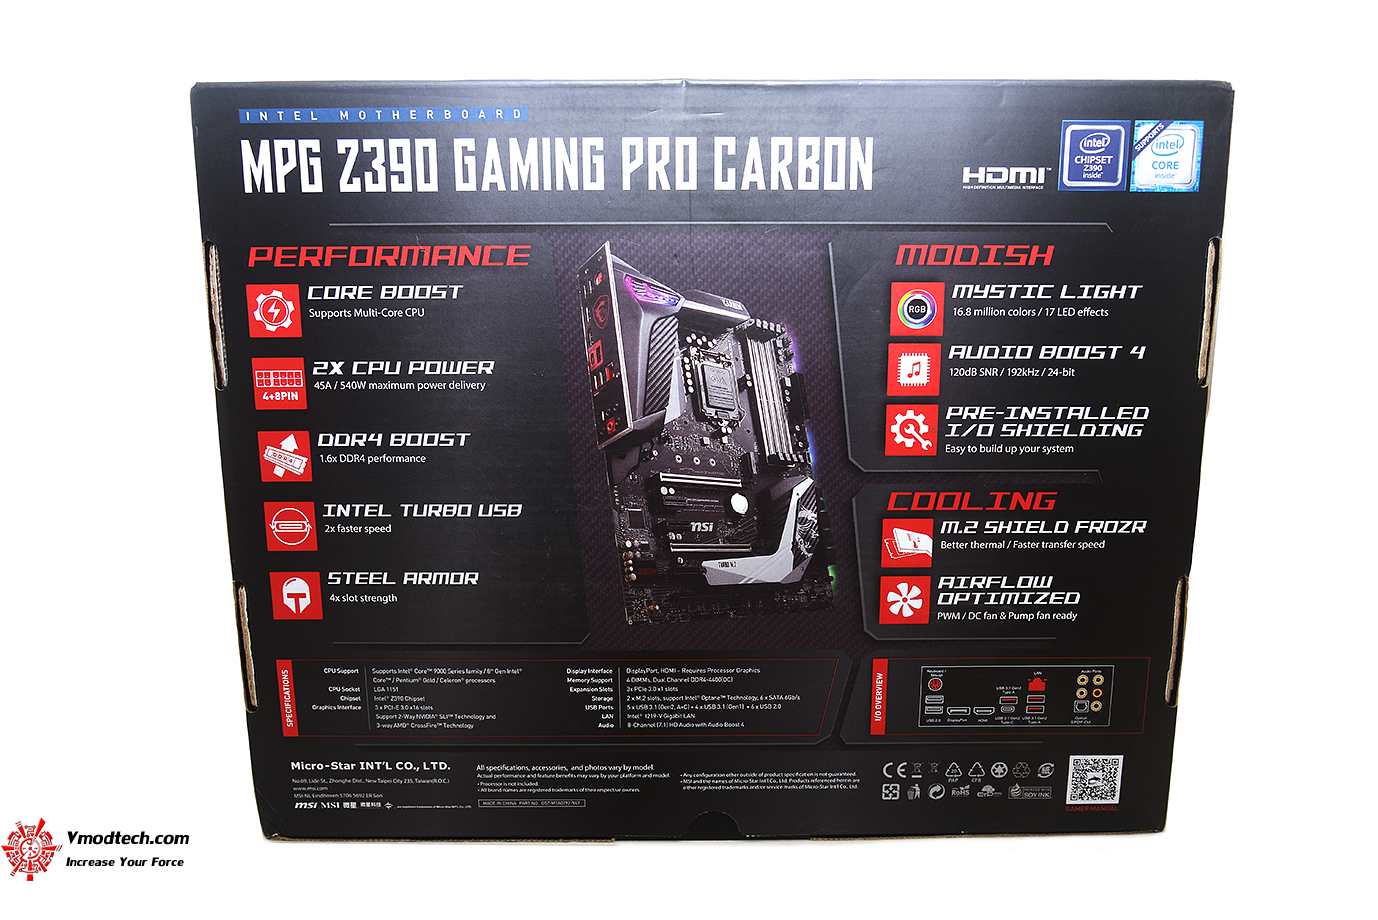 dsc 0997 MSI MPG Z390 GAMING PRO CARBON REVIEW